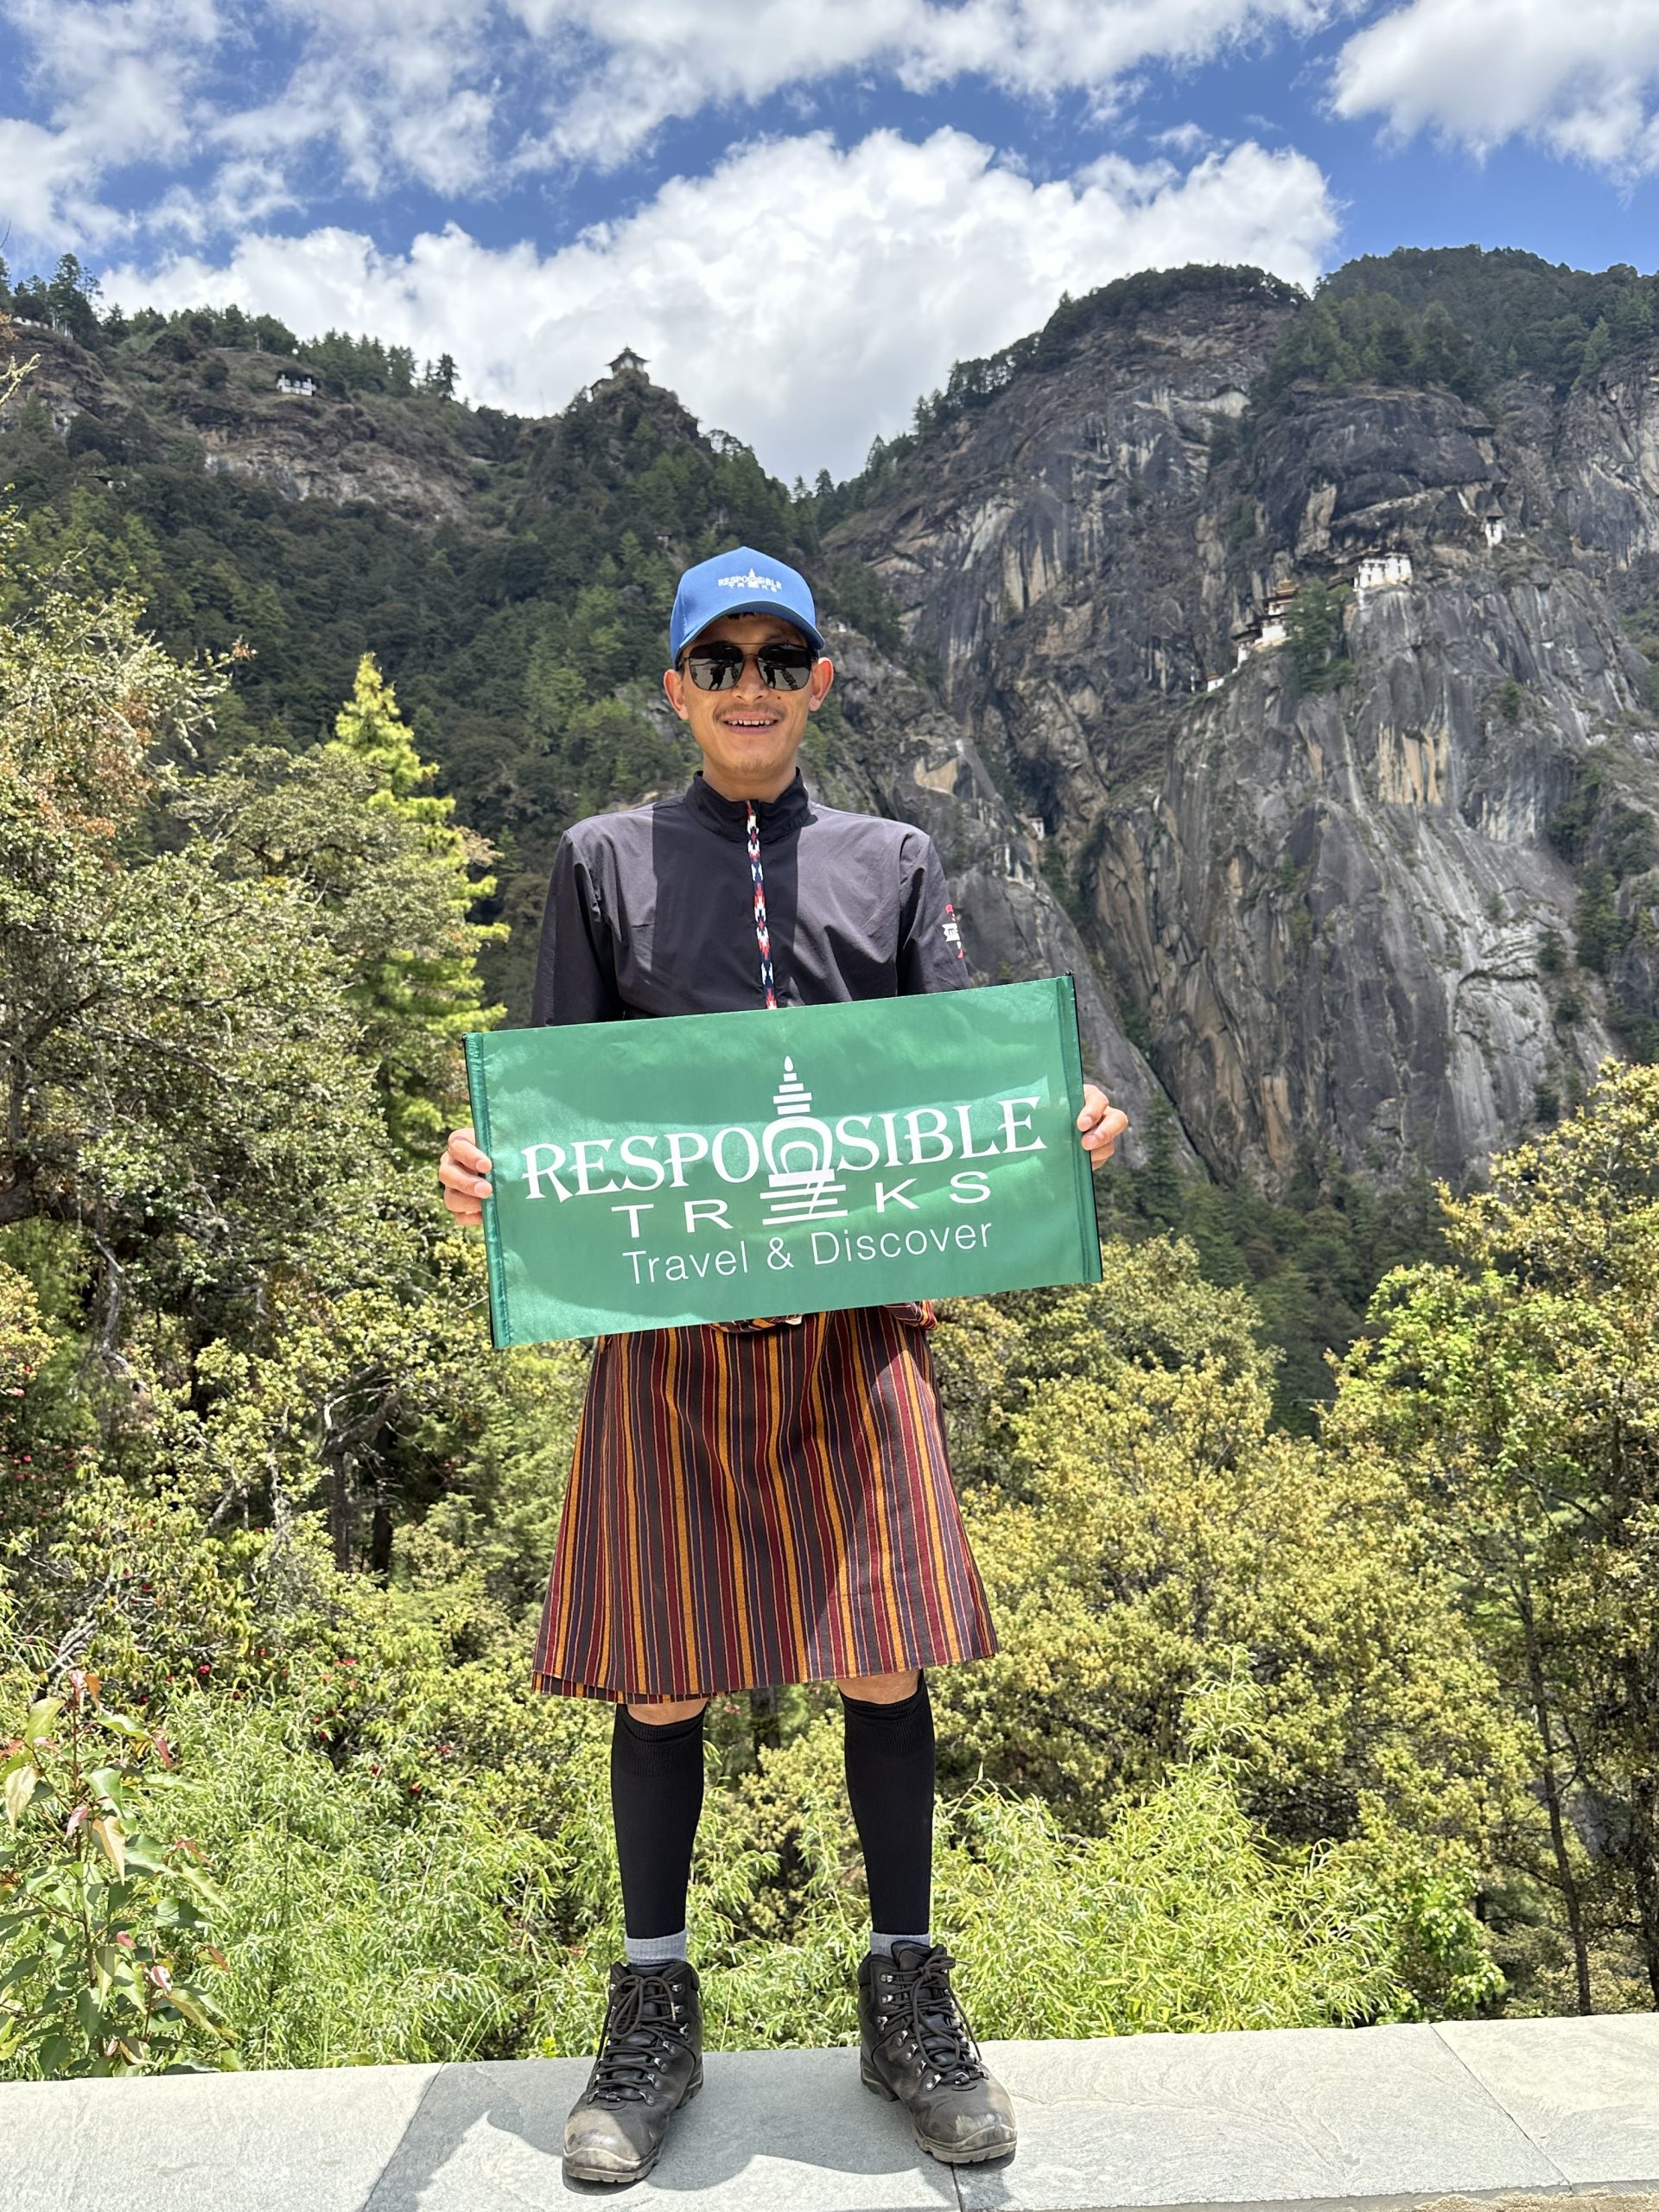 Eco Hiking and Culture tours in Bhutan